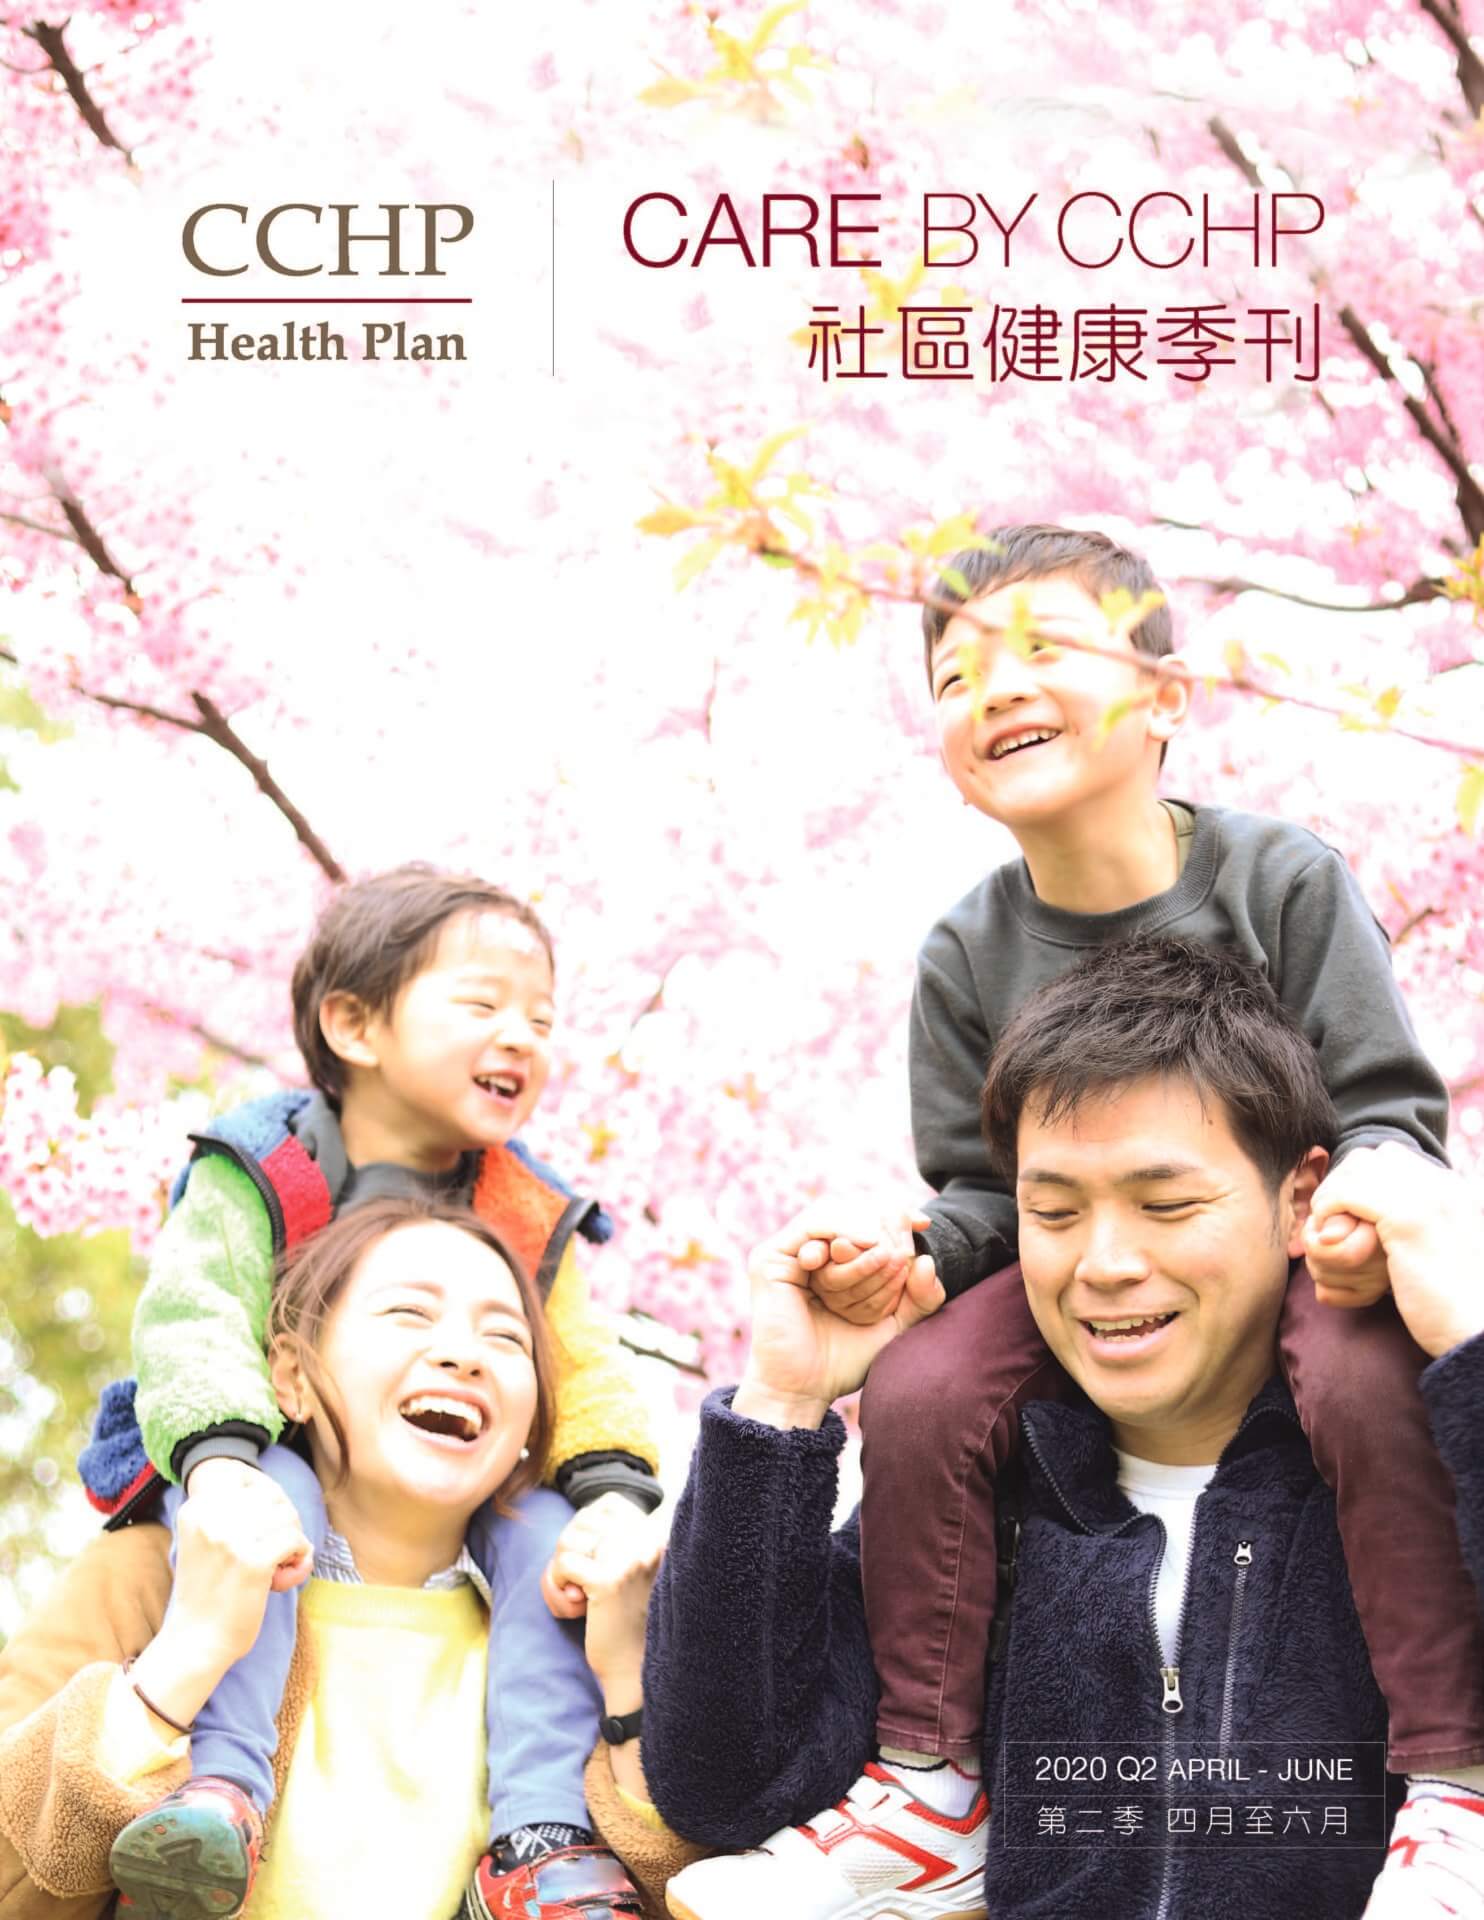 CCHP 2020 q2 newsletter, family happily outdoor looking at cherry blossom